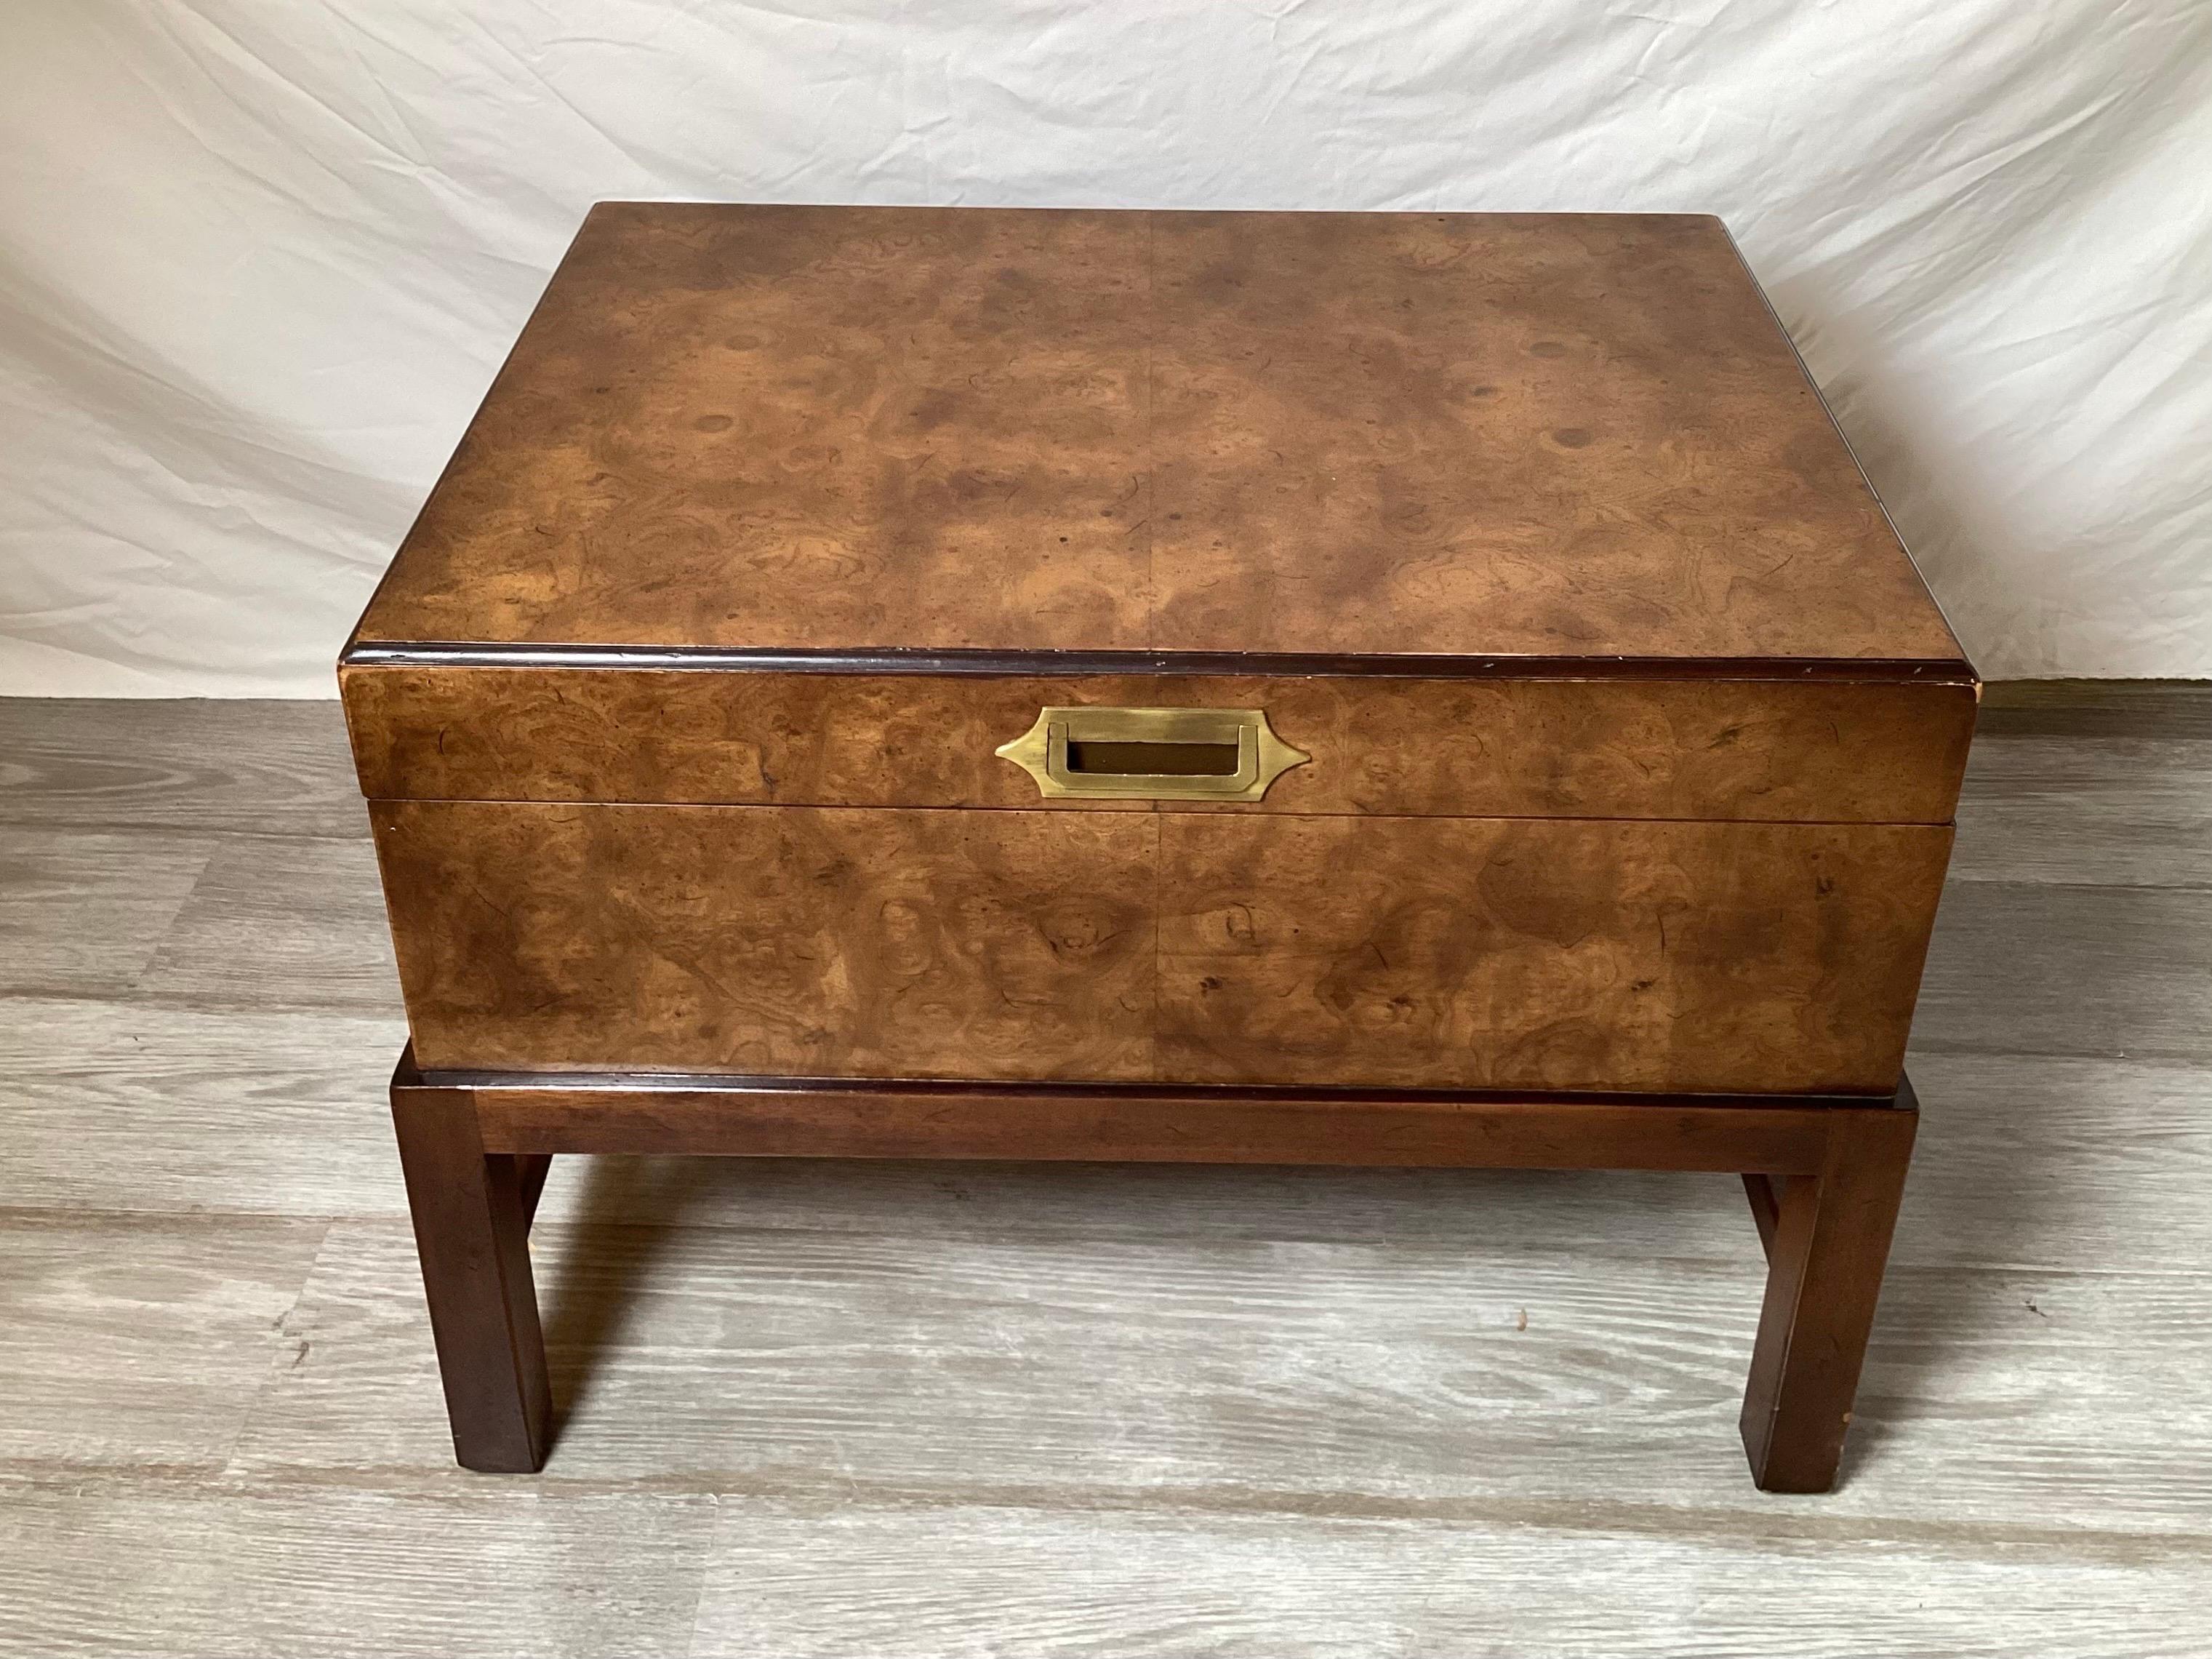 A 1970's burl walnut campaign style box on attached stand. The burl walnut box with recessed brass handle at the front with a parson style solid mahogany base. A great small coffee table or side chest in a medium tone wood and dark at the base.